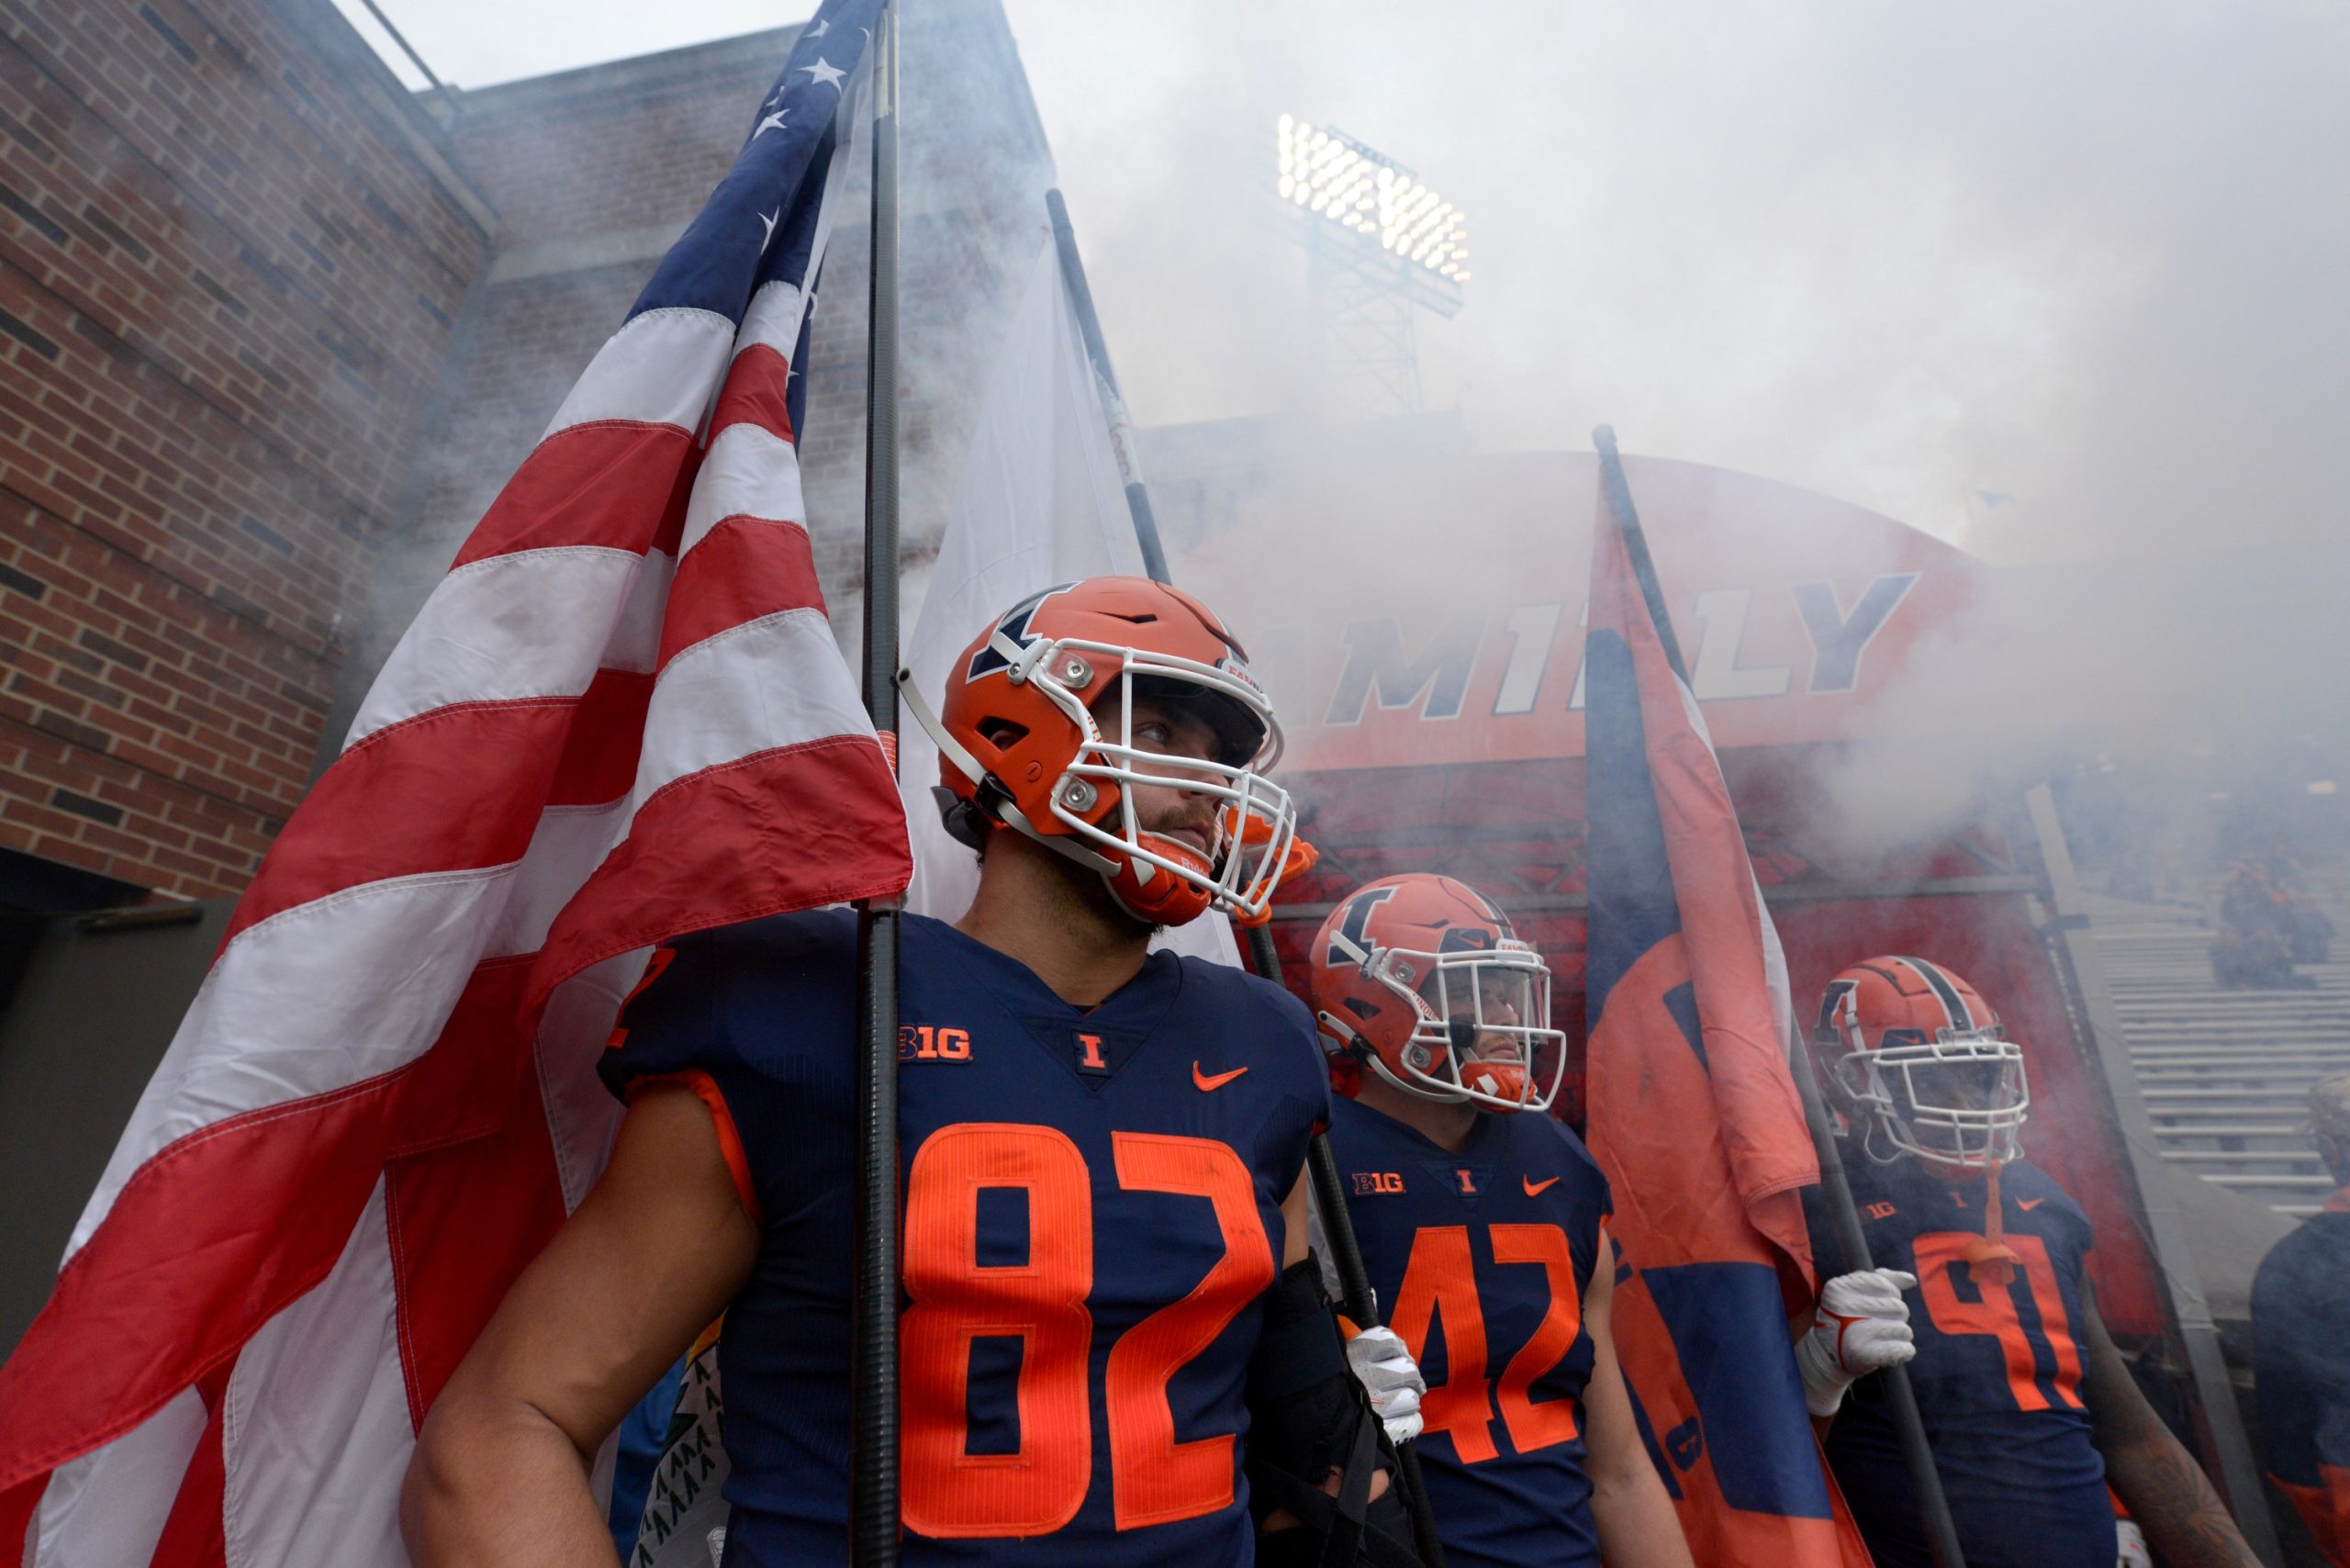 Where Does Illinois Stand In Football Recruiting?